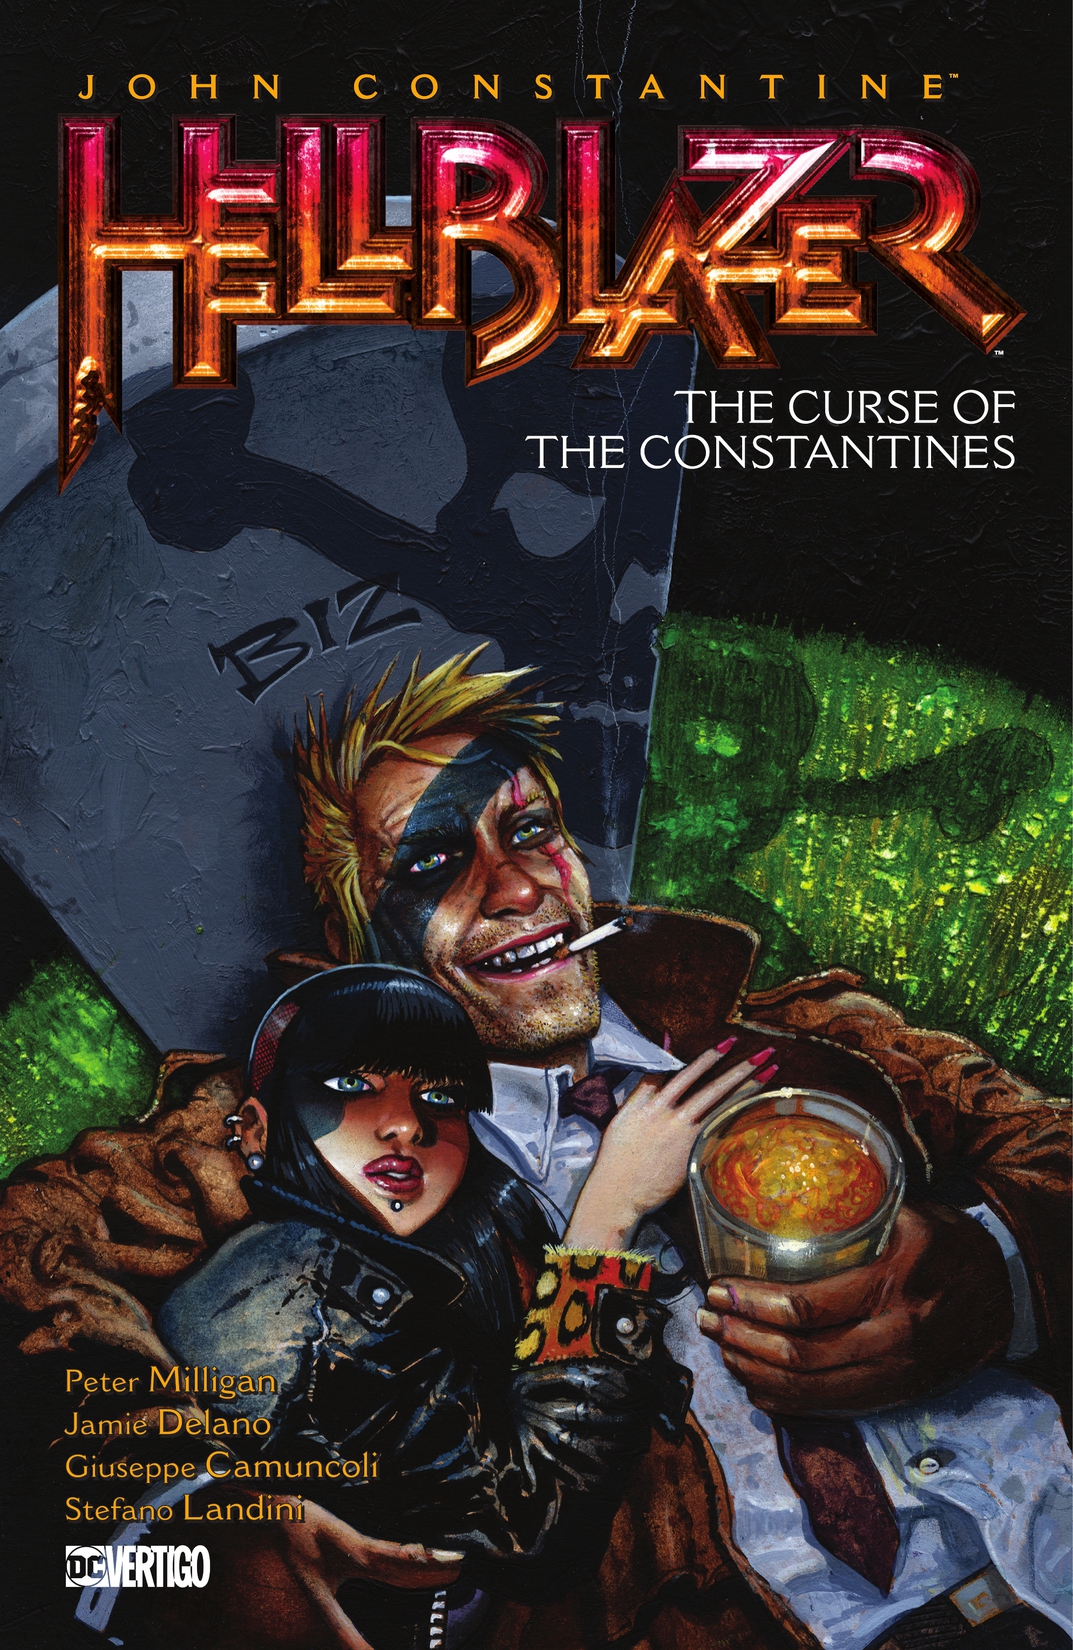 John Constantine, Hellblazer Vol. 26: The Curse of the Constantines preview images